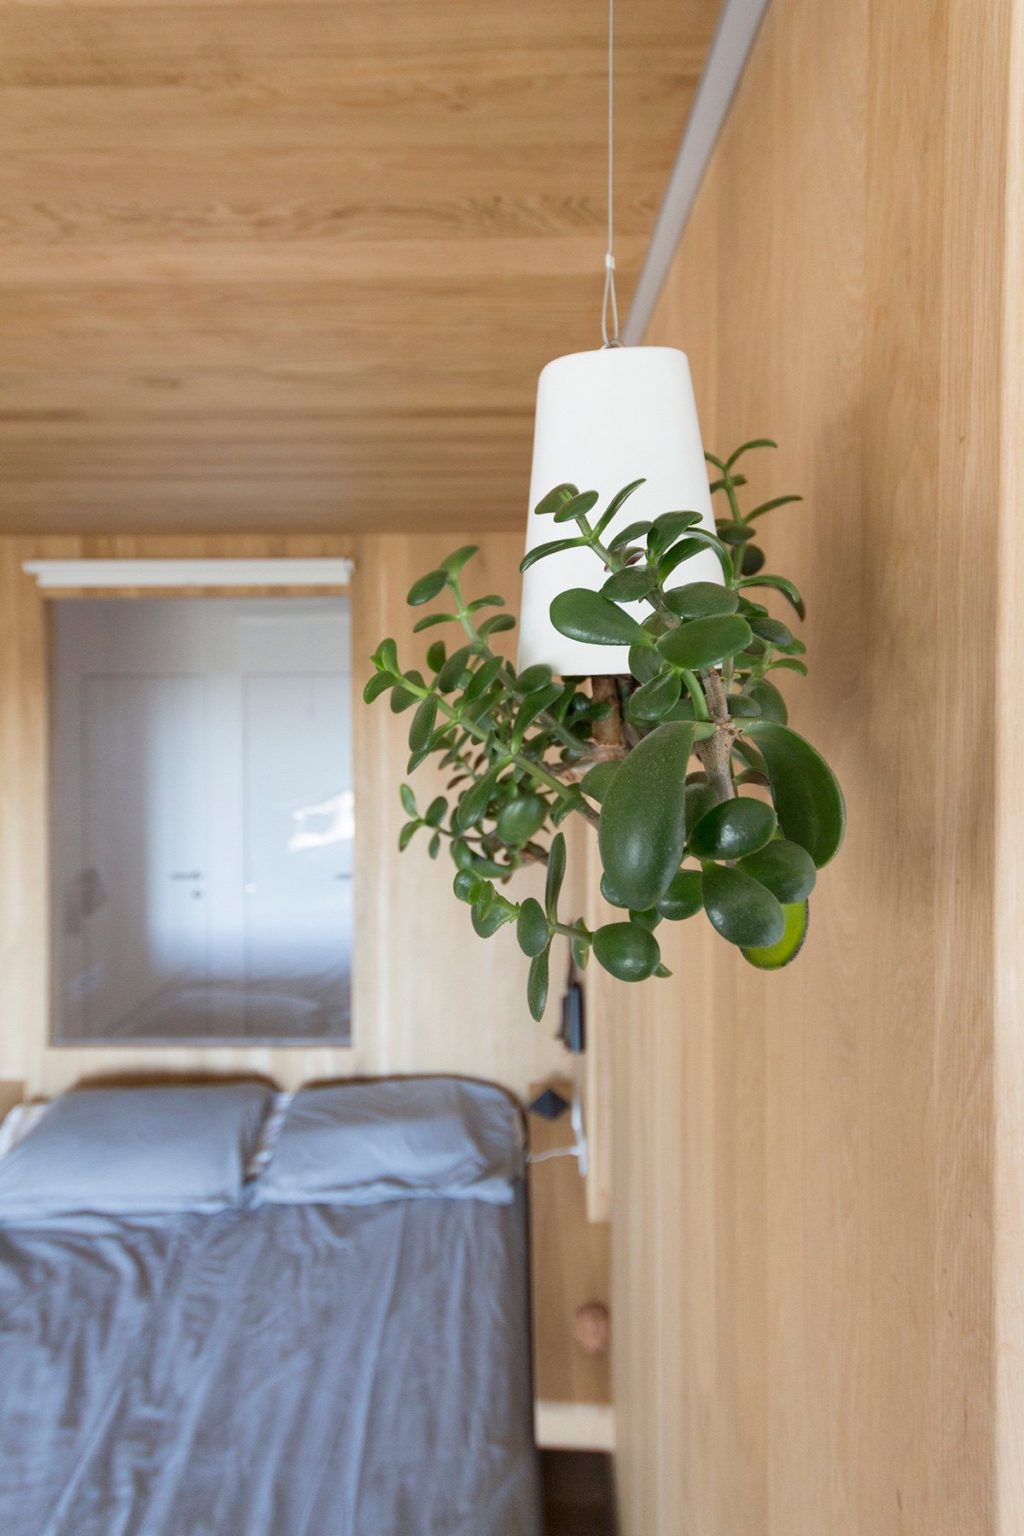 25.Bedroom-living-light-white-cone-on-wooden-wall-original-adds-character